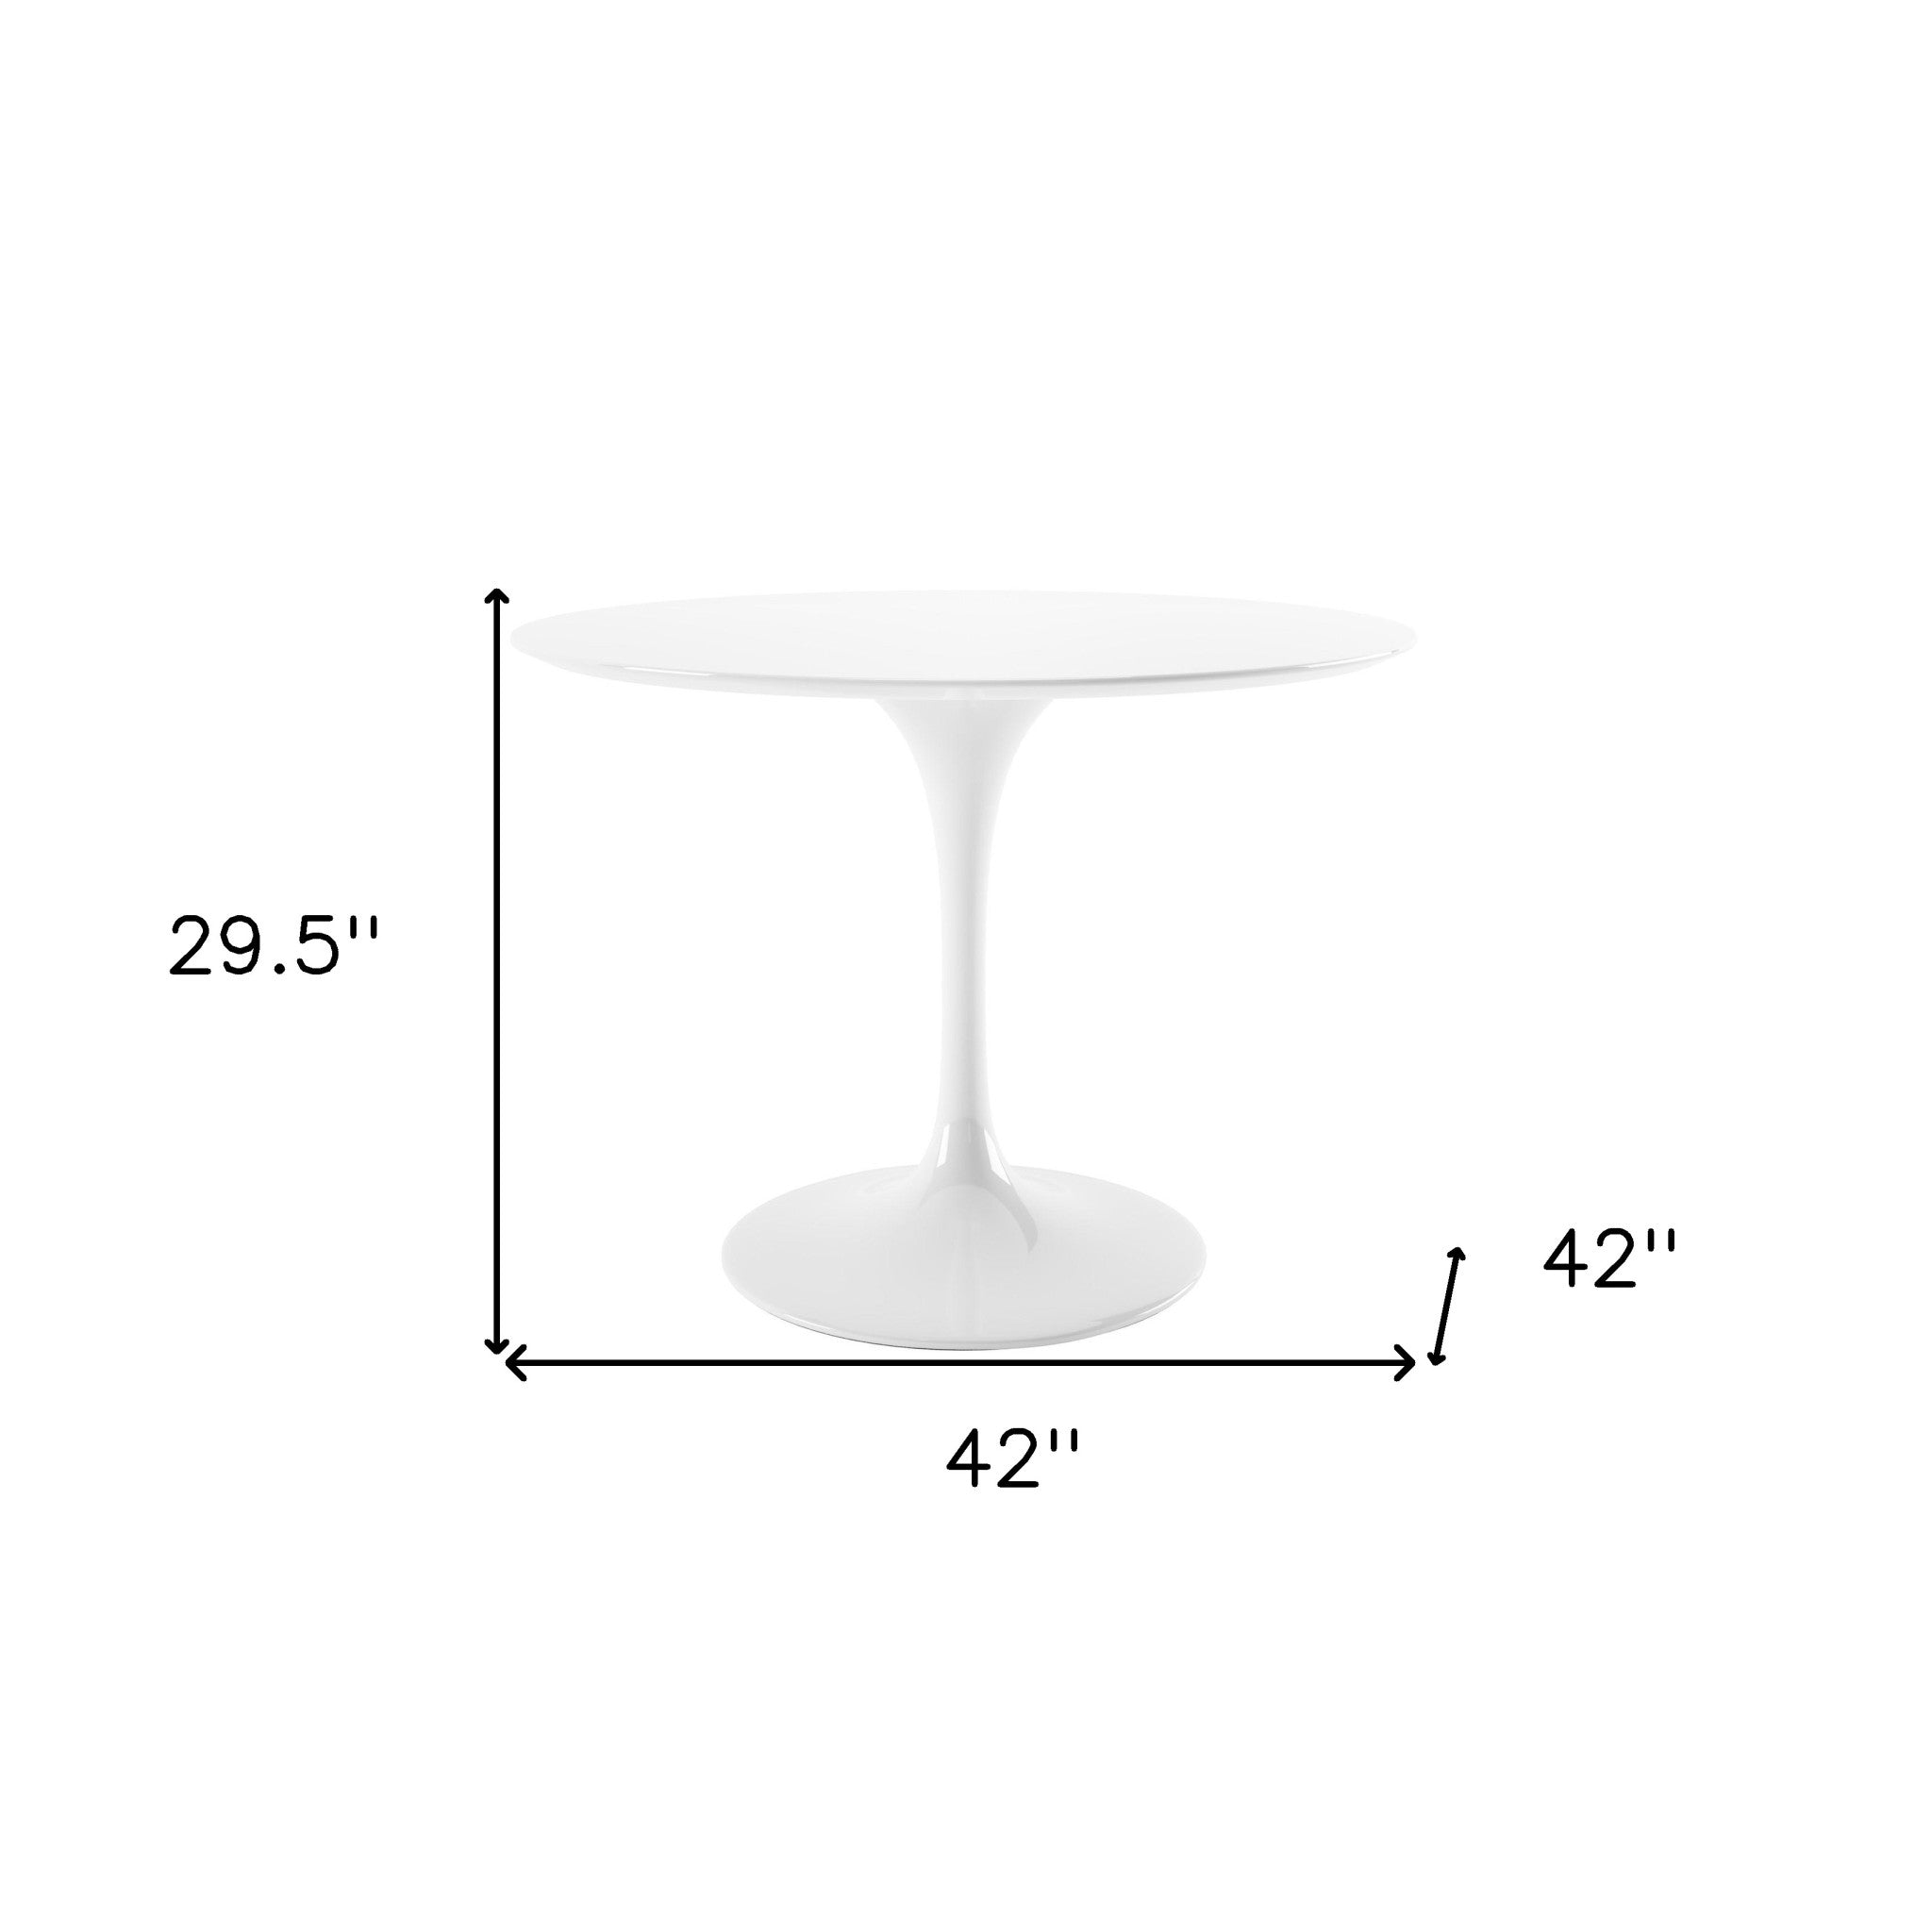 42" White Fiberglass And Metal Dining Table